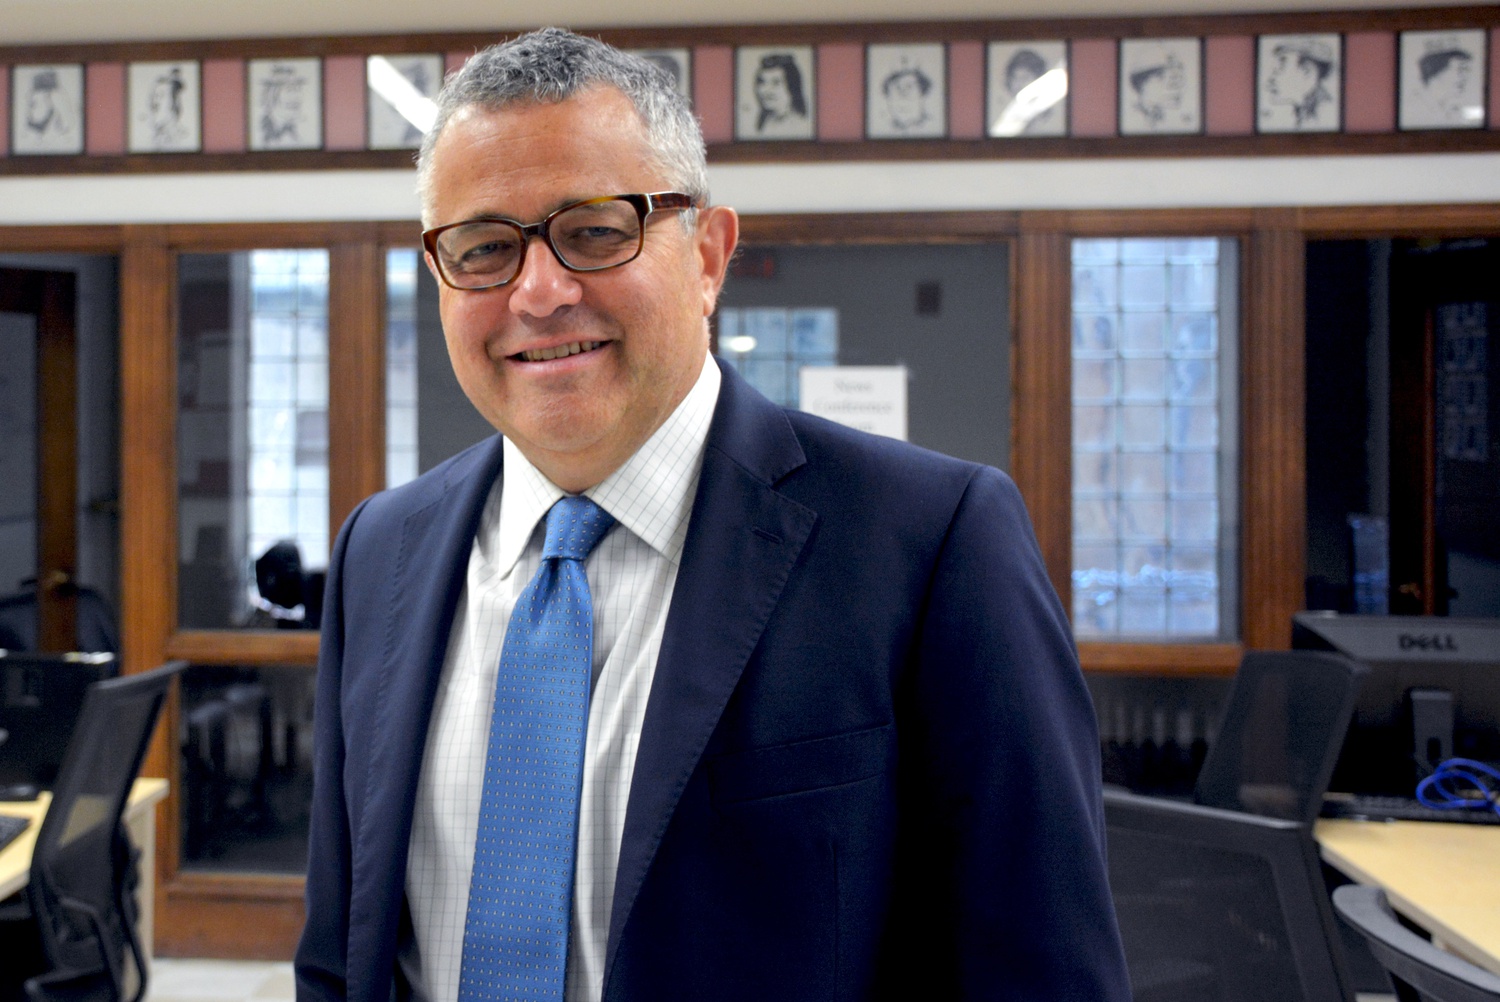 Jeffrey R. Toobin '82, a former Crimson editor, was Chesebro's Harvard Law School classmate and also a former research assistant for Tribe.